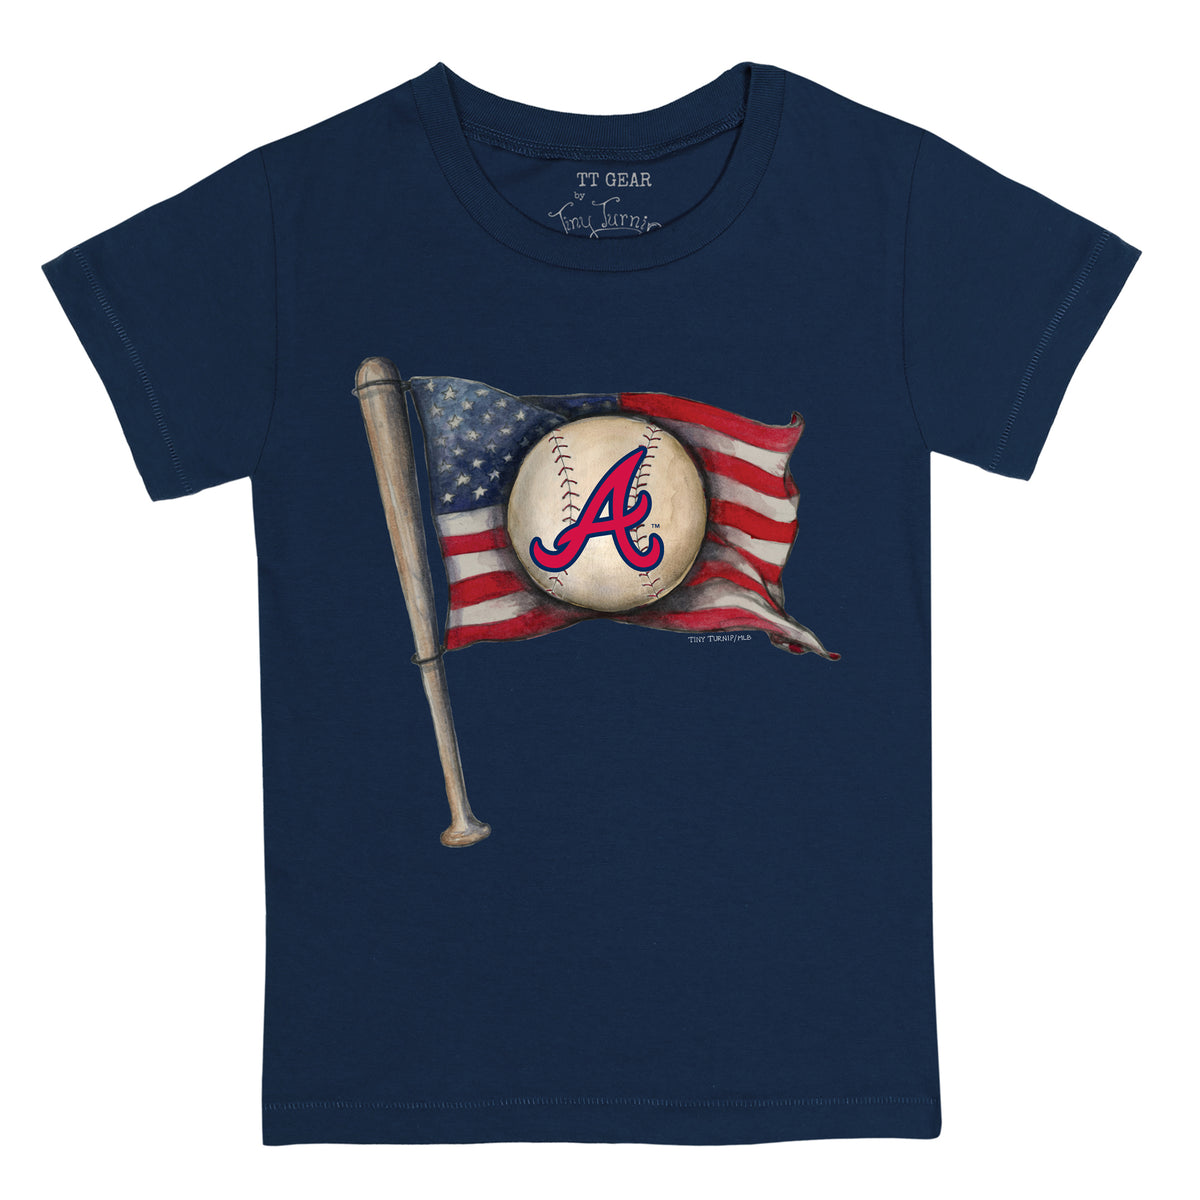 braves cropped tee